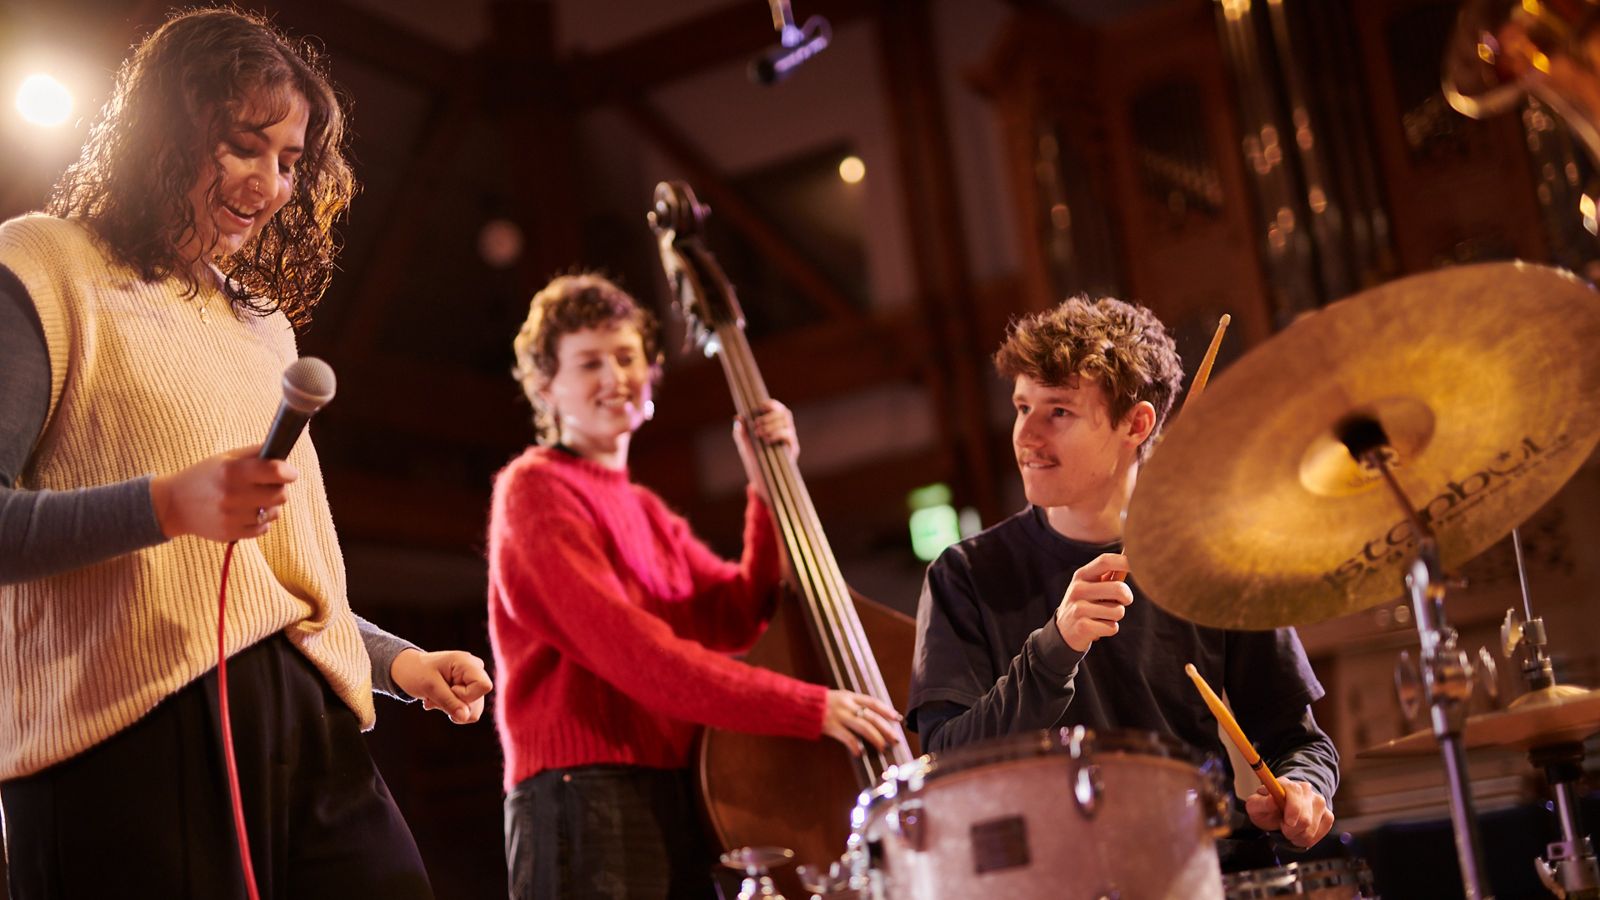 Three NZSM students playing on stage together.